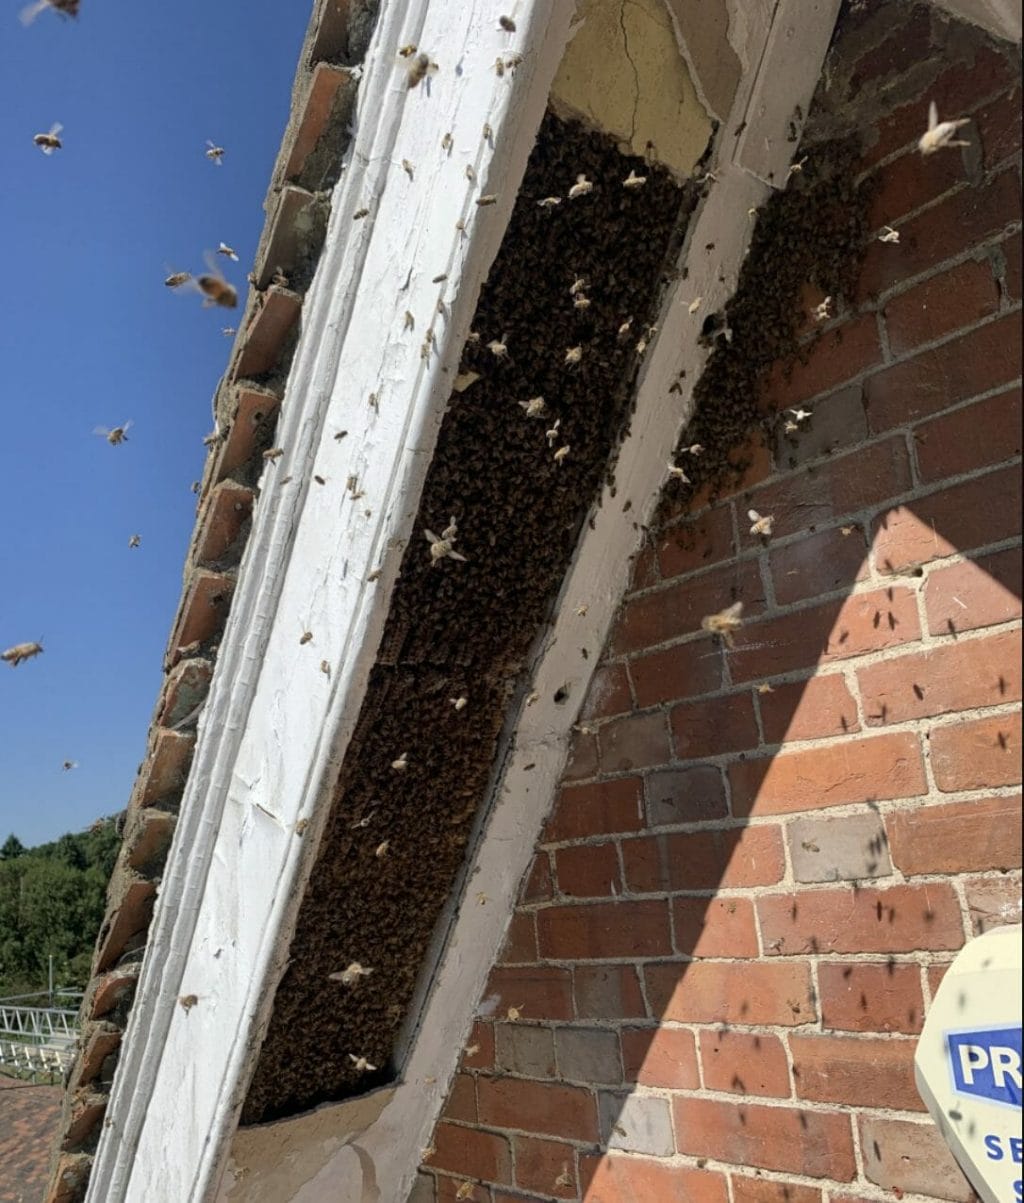 wasps swarming in a roofline in medway